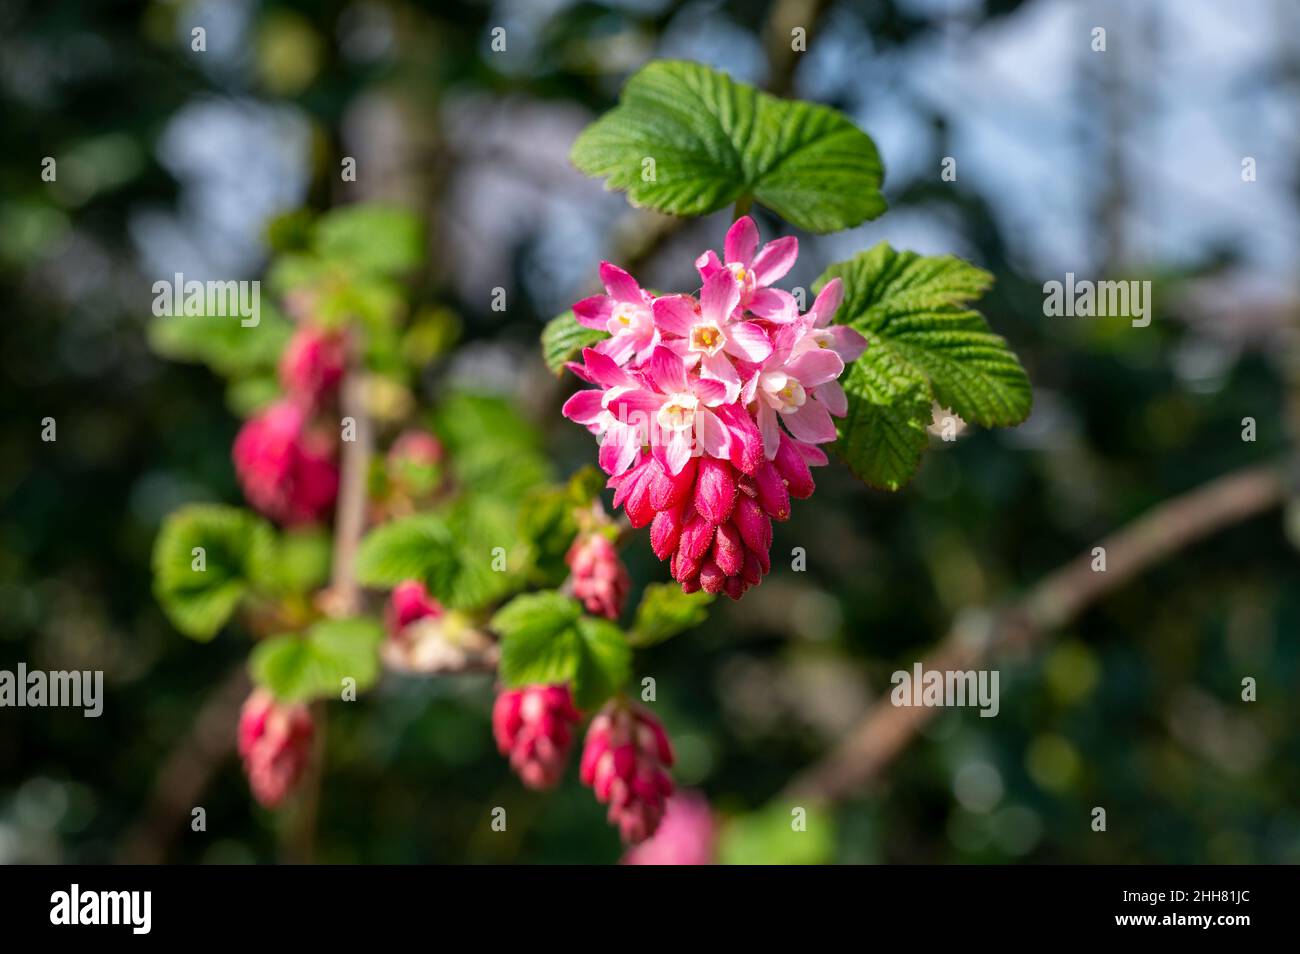 Spring blossom of pink Ribes sanguineum, flowering currant, redflower currant plant close up Stock Photo